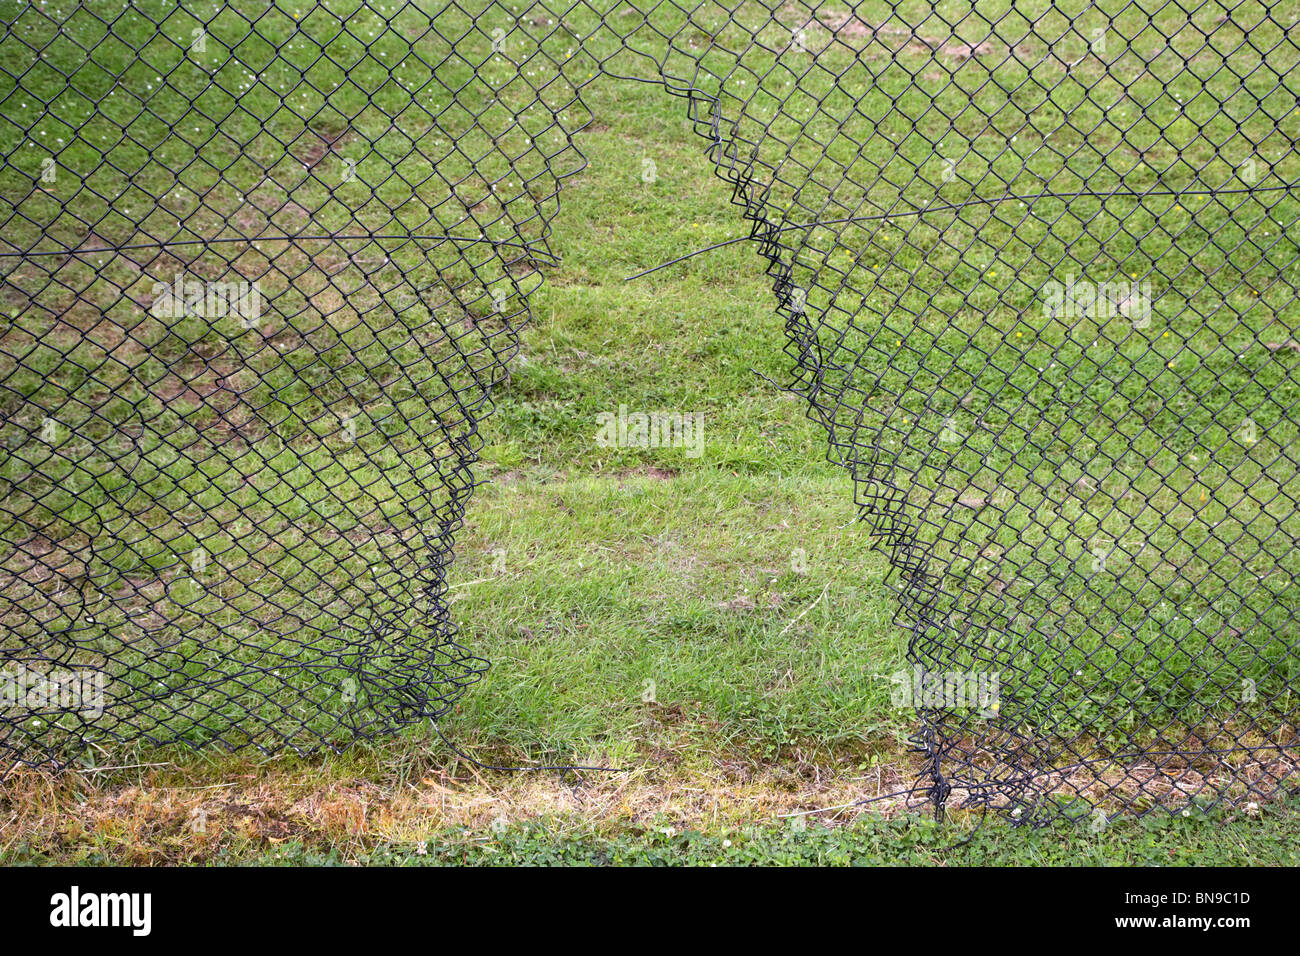 hole cut in chain link fencing in the uk Stock Photo